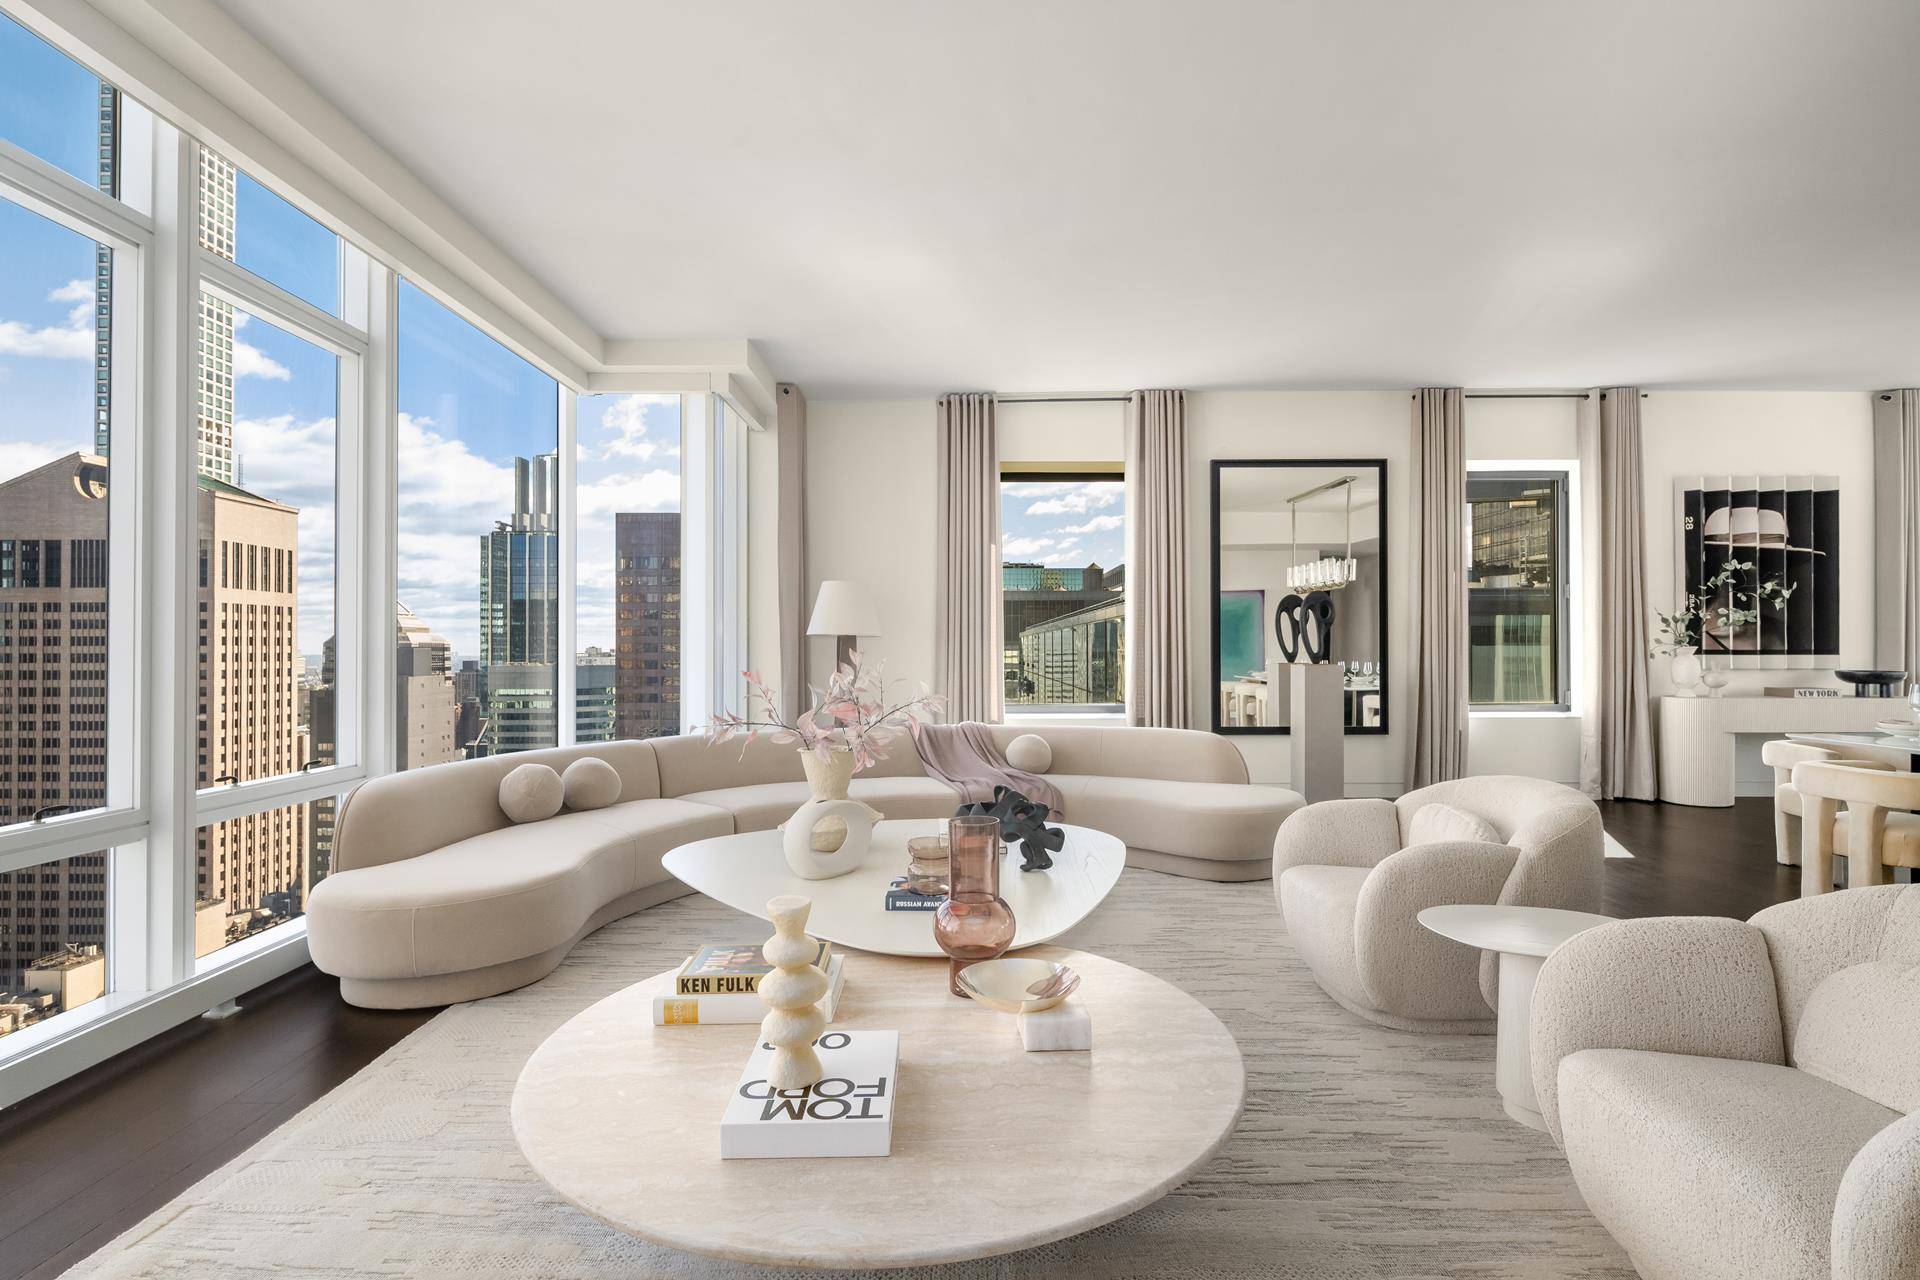 Welcome to Penthouse 43 at The Baccarat Residences, an architectural masterpiece in the heart of Midtown Manhattan, designed by the globally renowned SOM architects and curated with refined interiors by ...